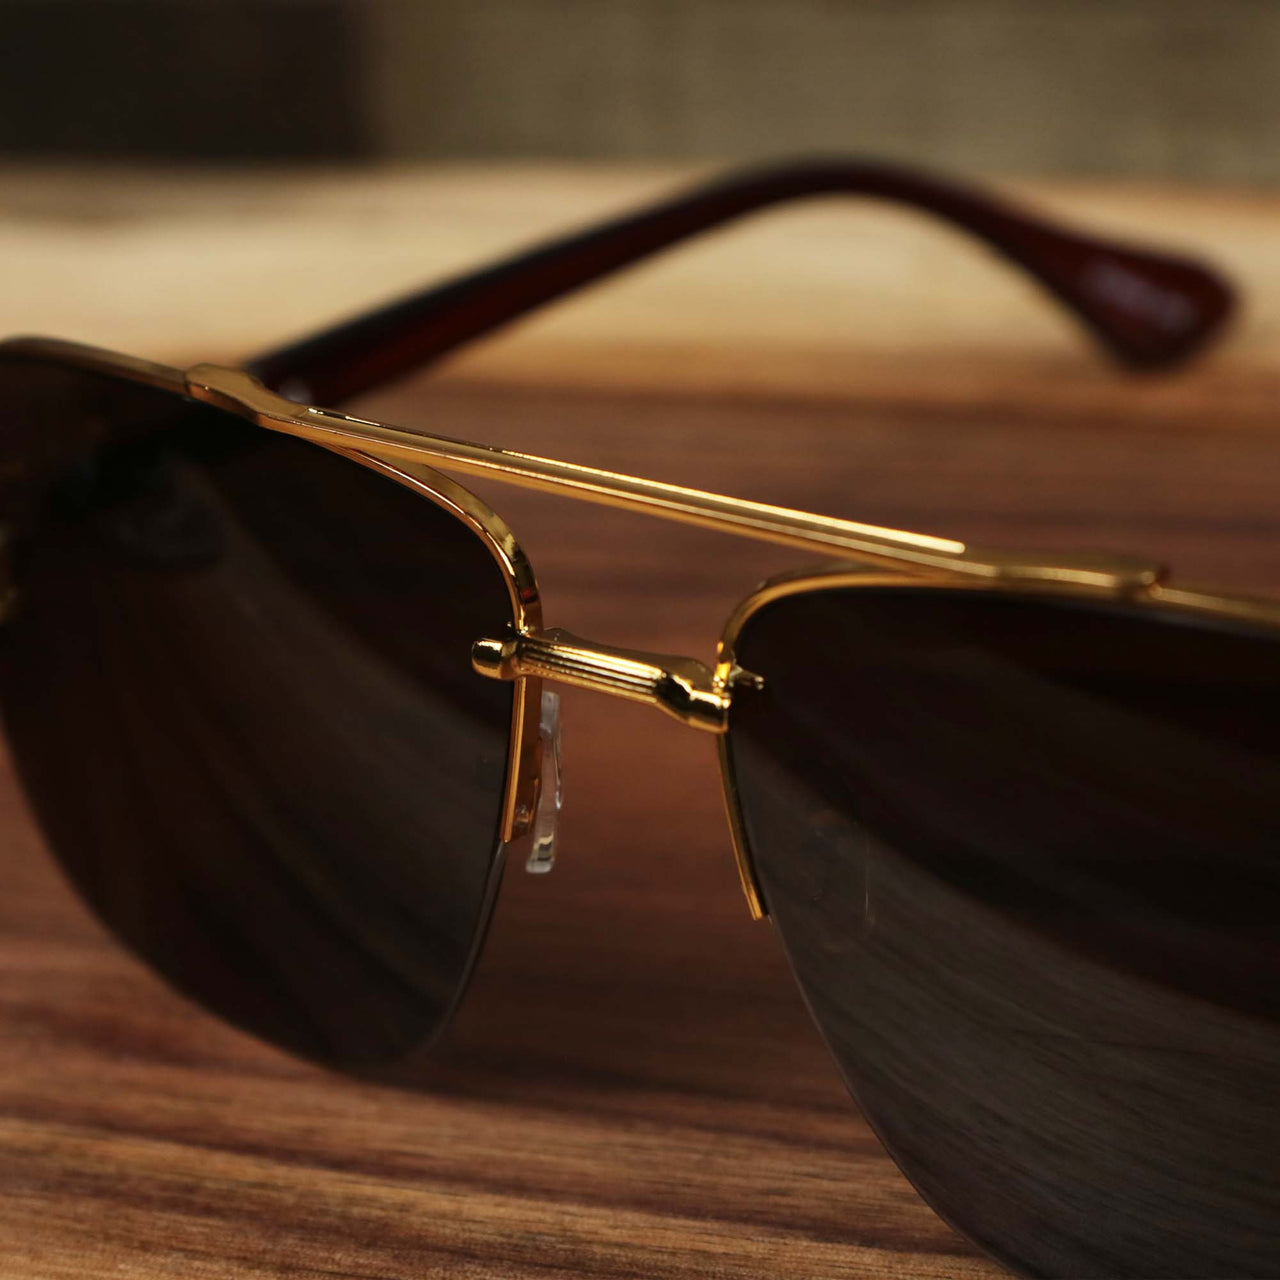 The bridge on the Round Rectangle Frame Brown Lens Sunglasses with Gold Frame